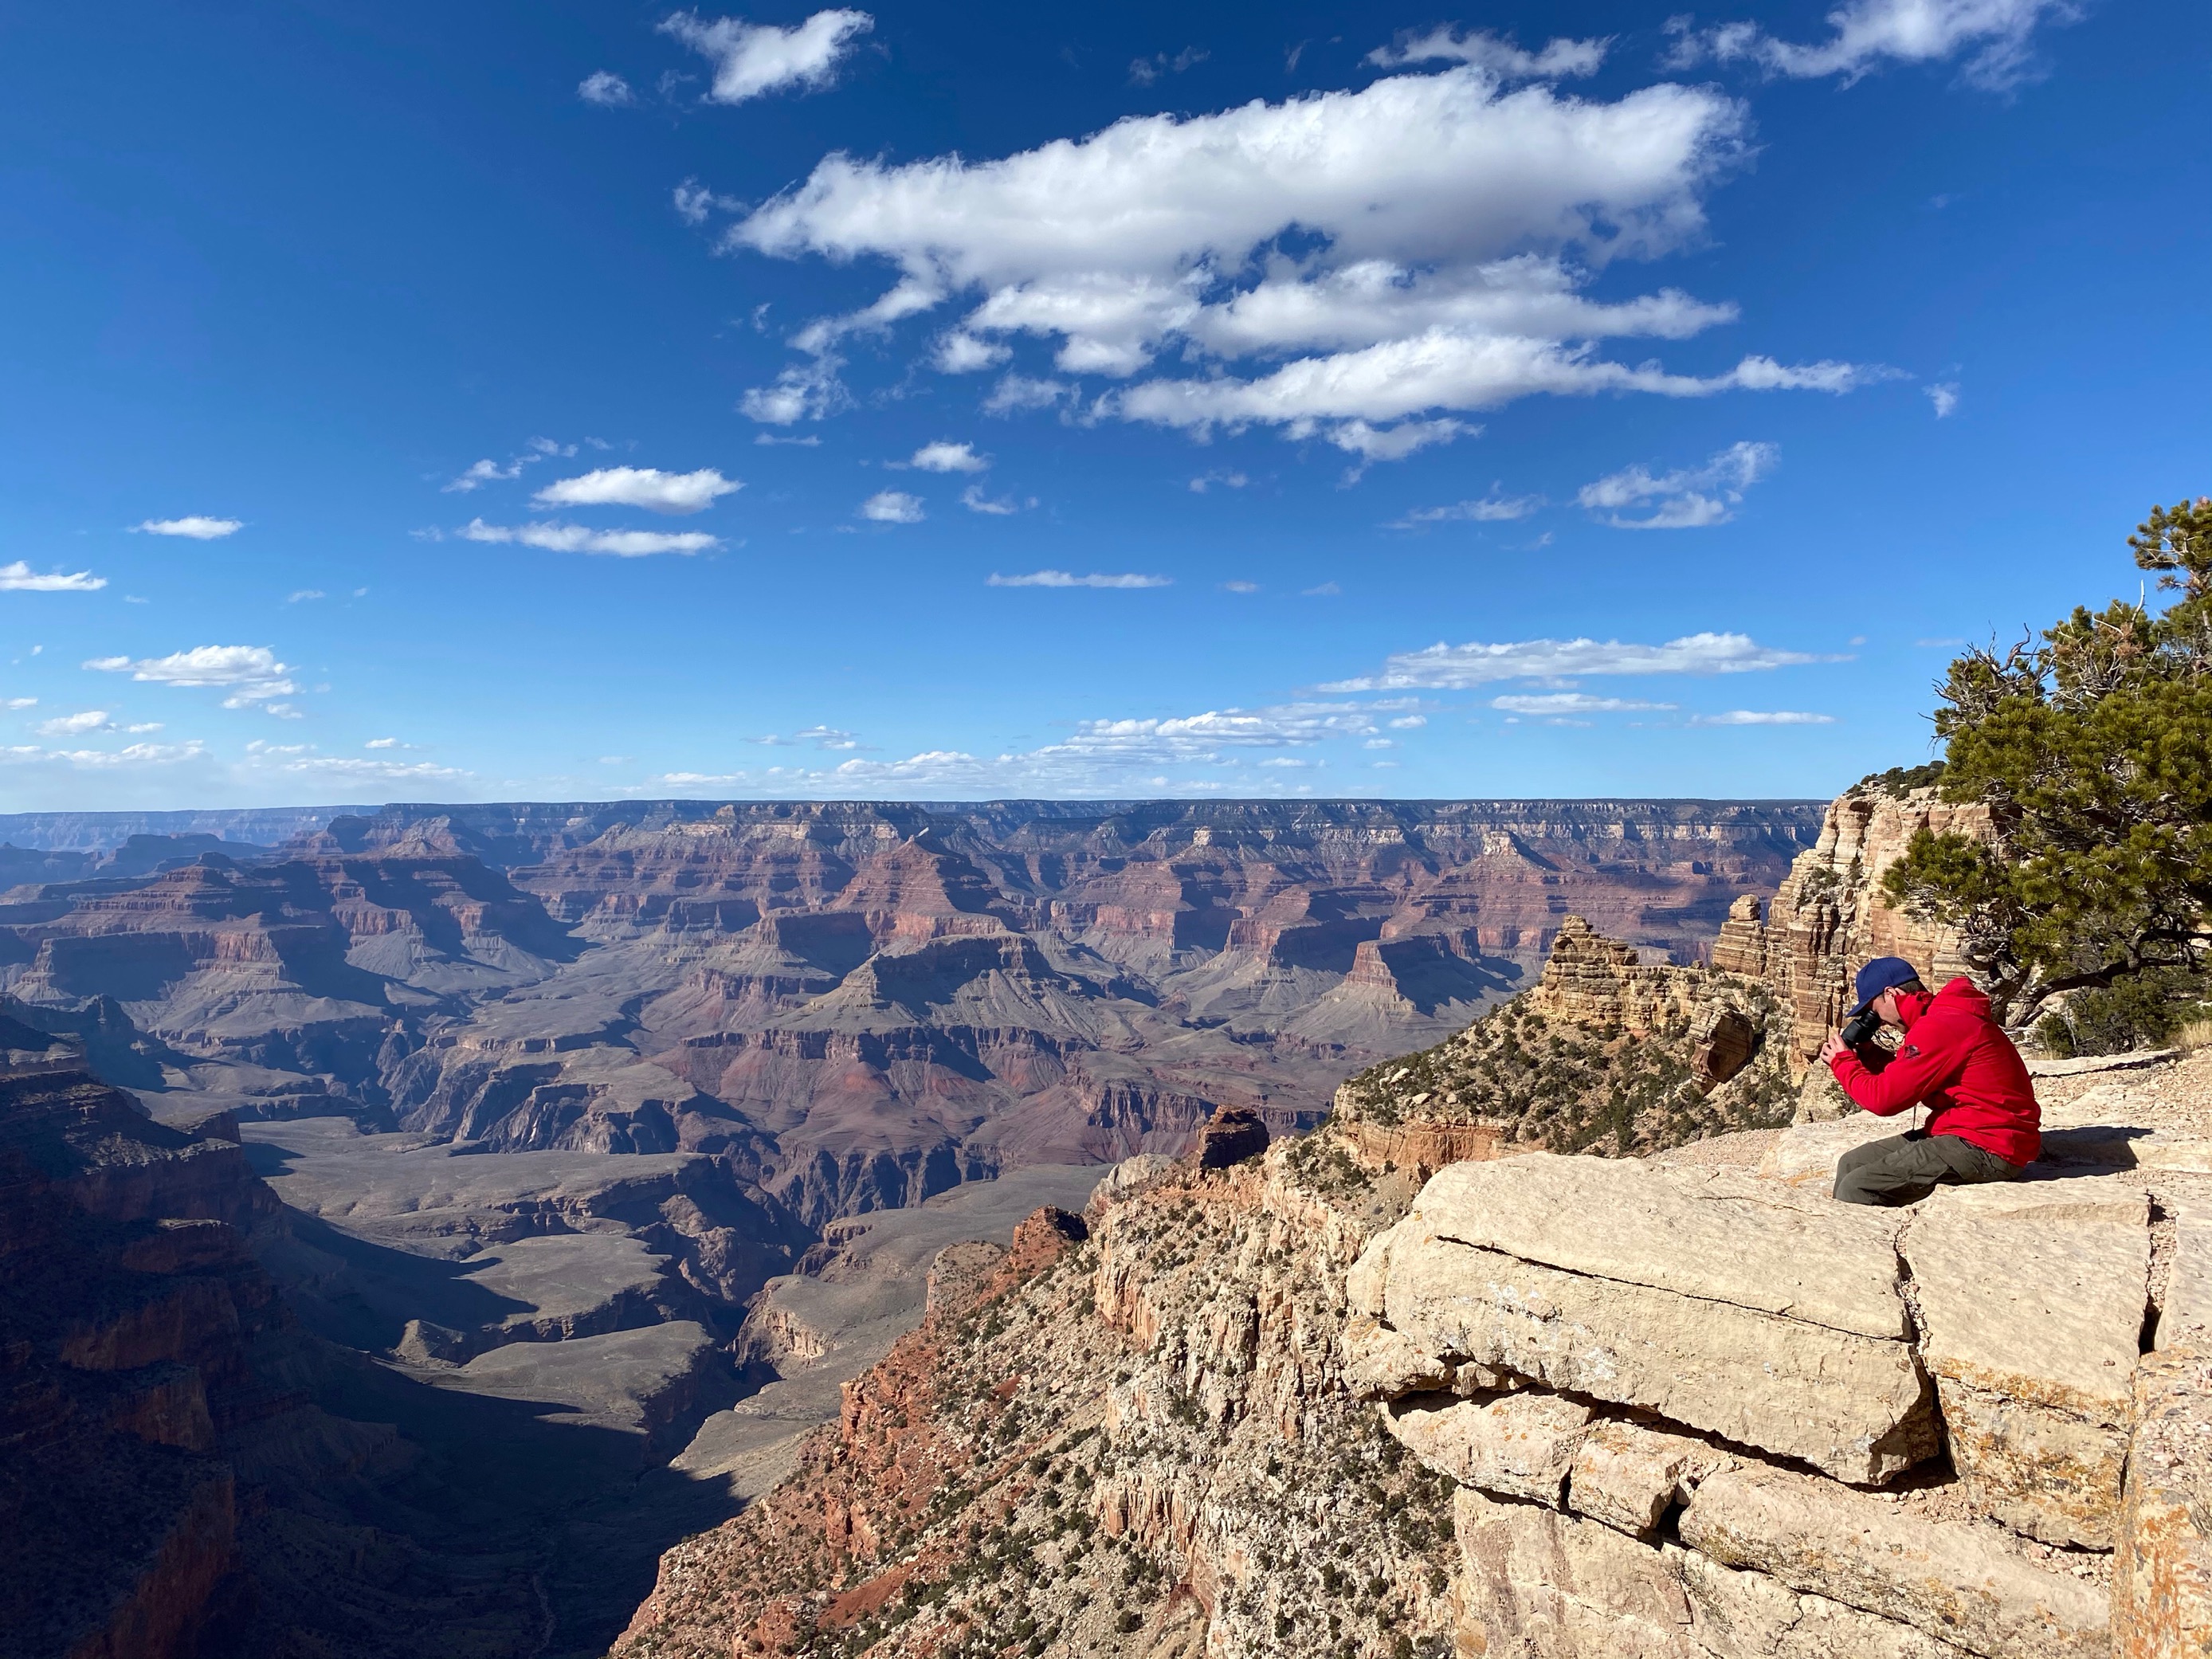 A rescuer sits at the edge of the canyon looking below the rim with binoculars